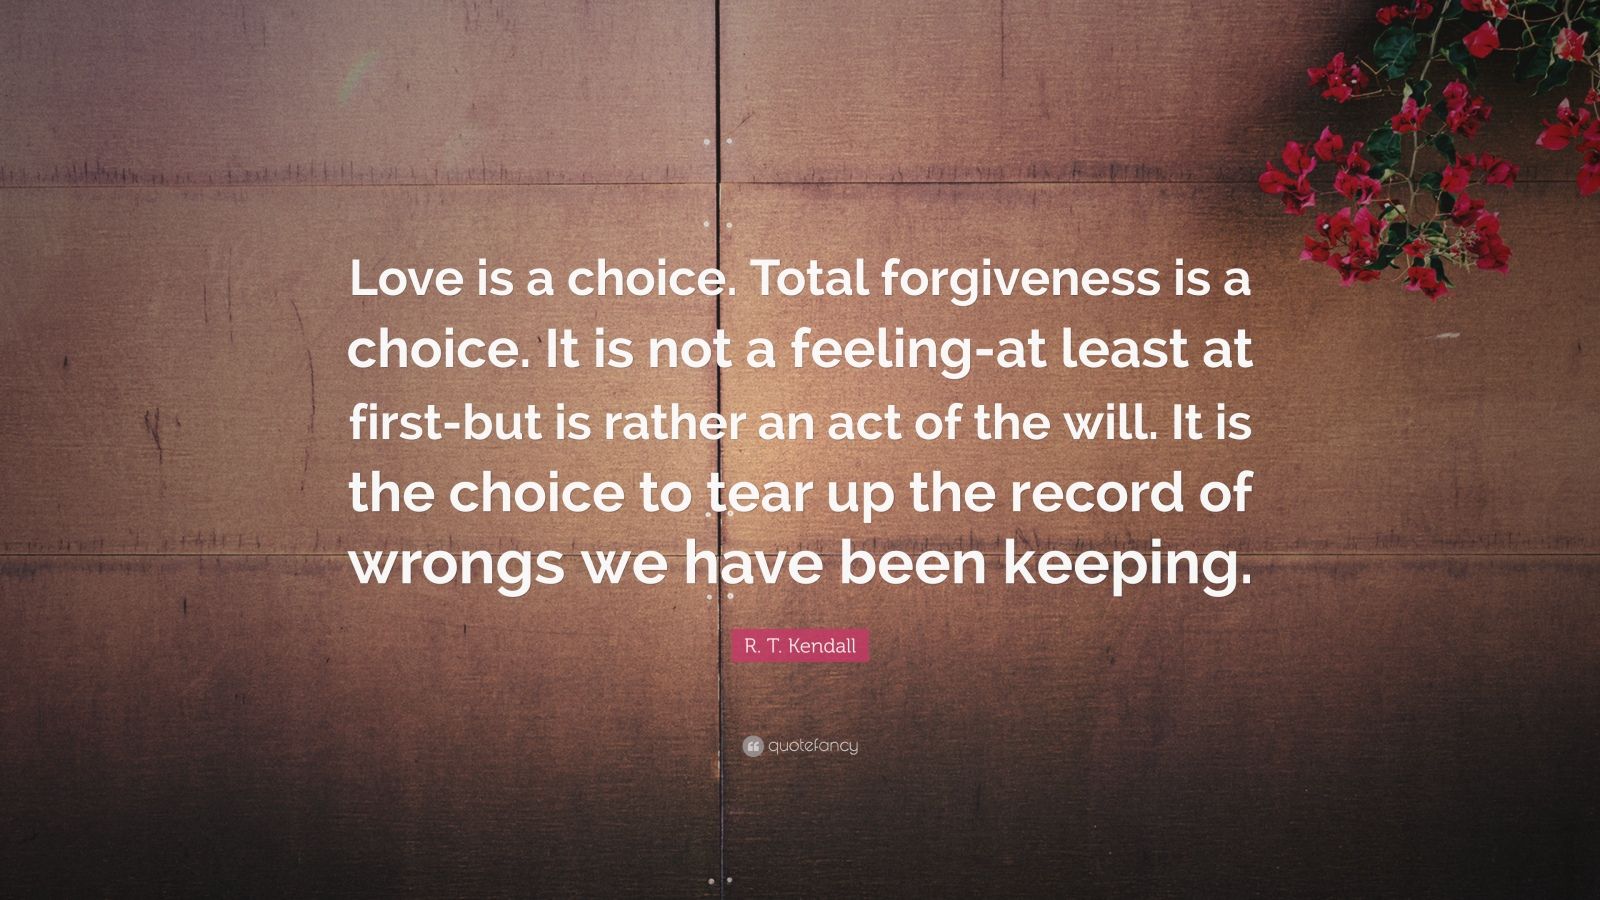 R. T. Kendall Quote “Love is a choice. Total